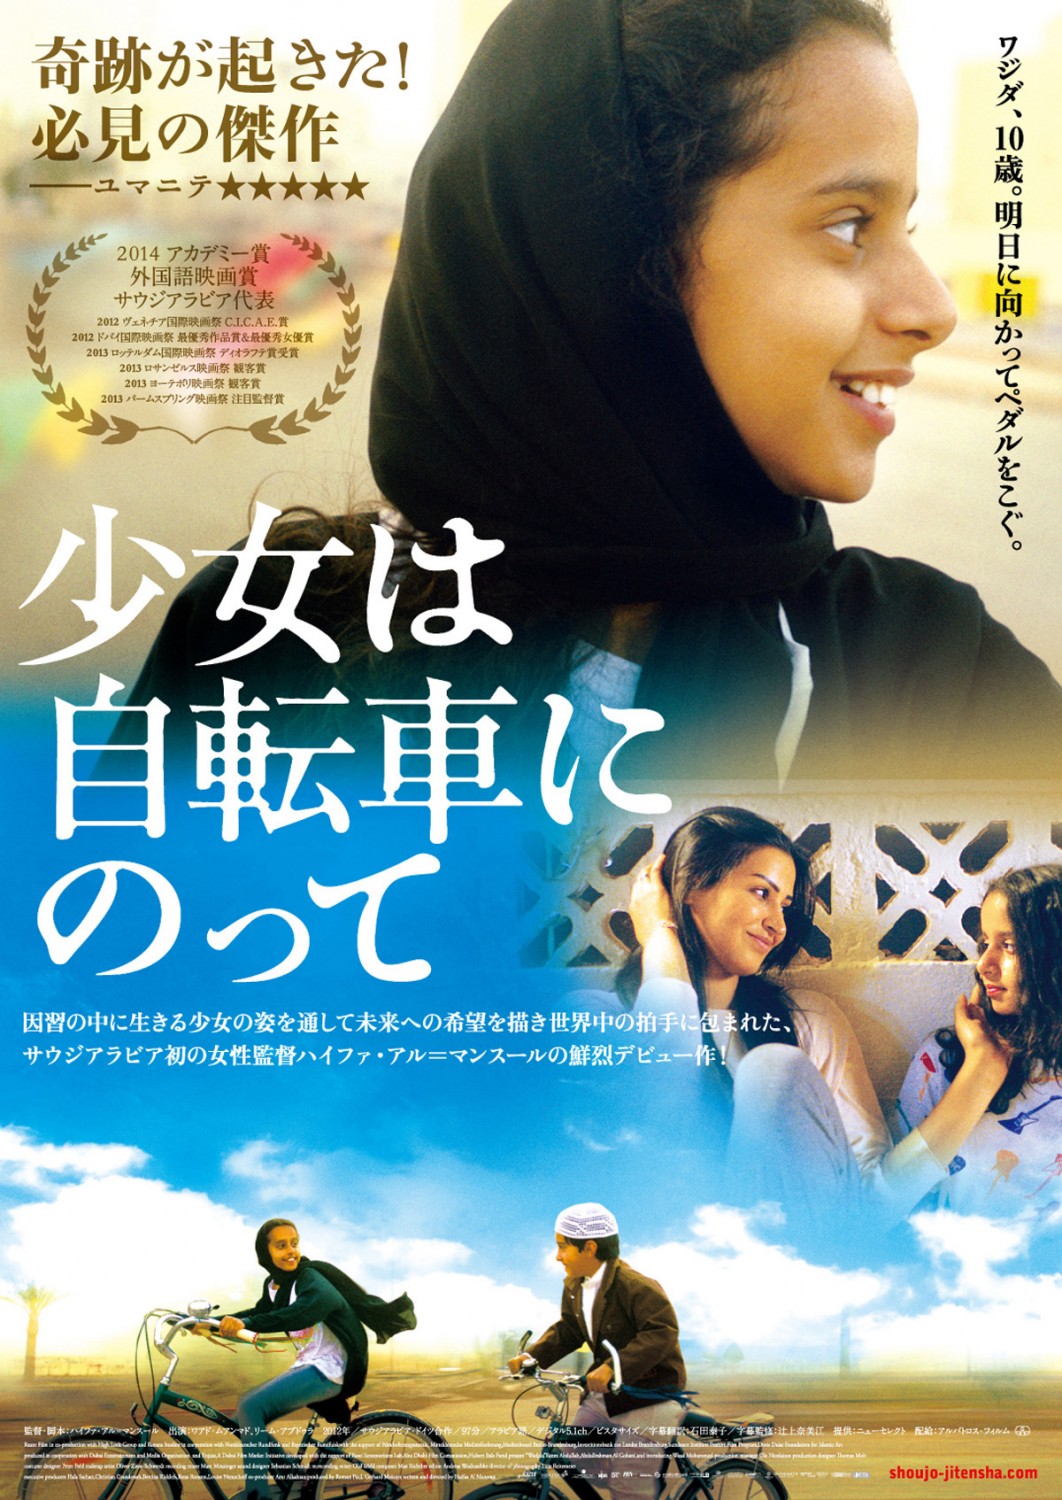 Extra Large Movie Poster Image for Wadjda (#3 of 6)